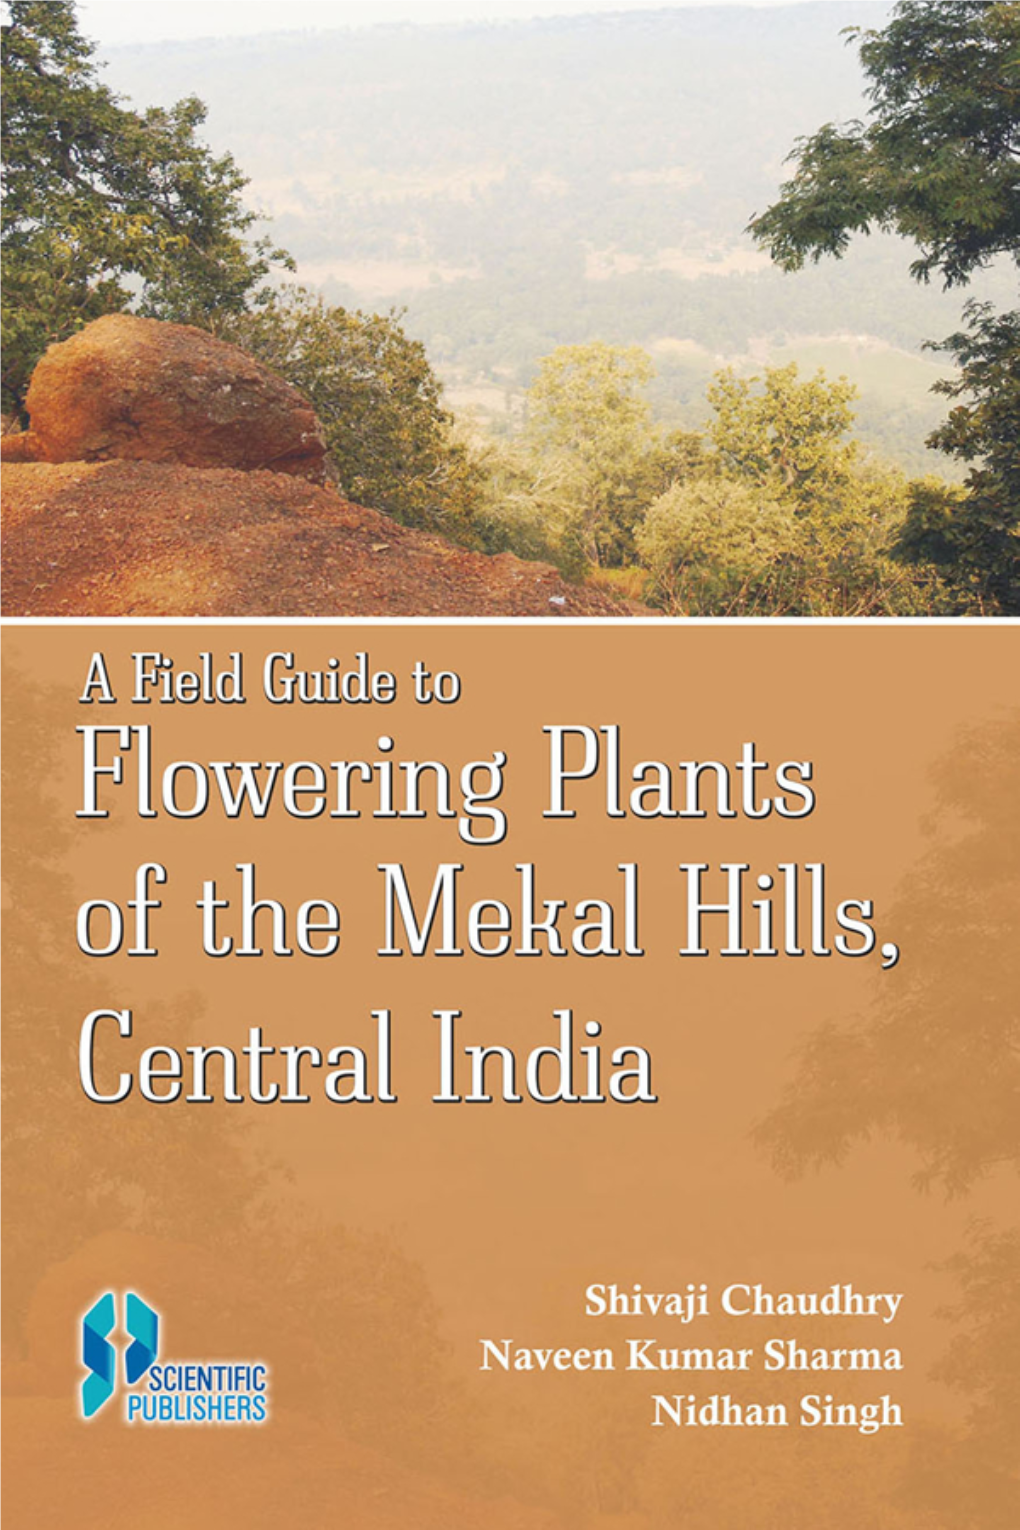 A Field Guide to Flowering Plants of the Mekal Hills, Central India Authors